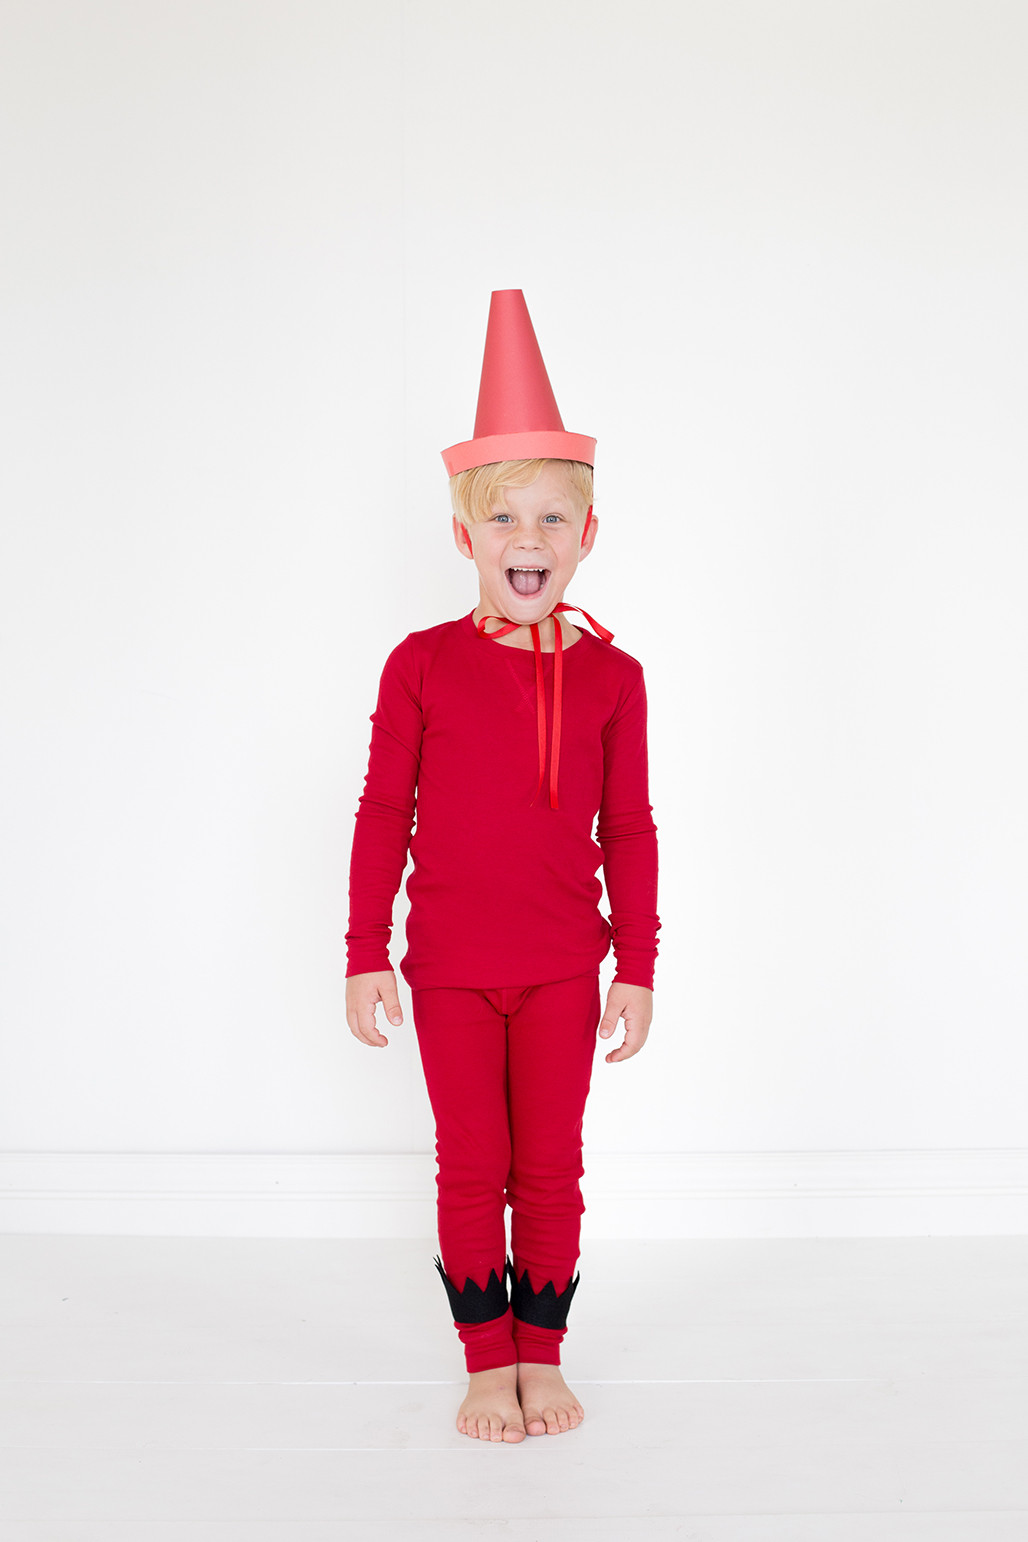 DIY Crayon Costume
 The Day the Crayons Quit costumes